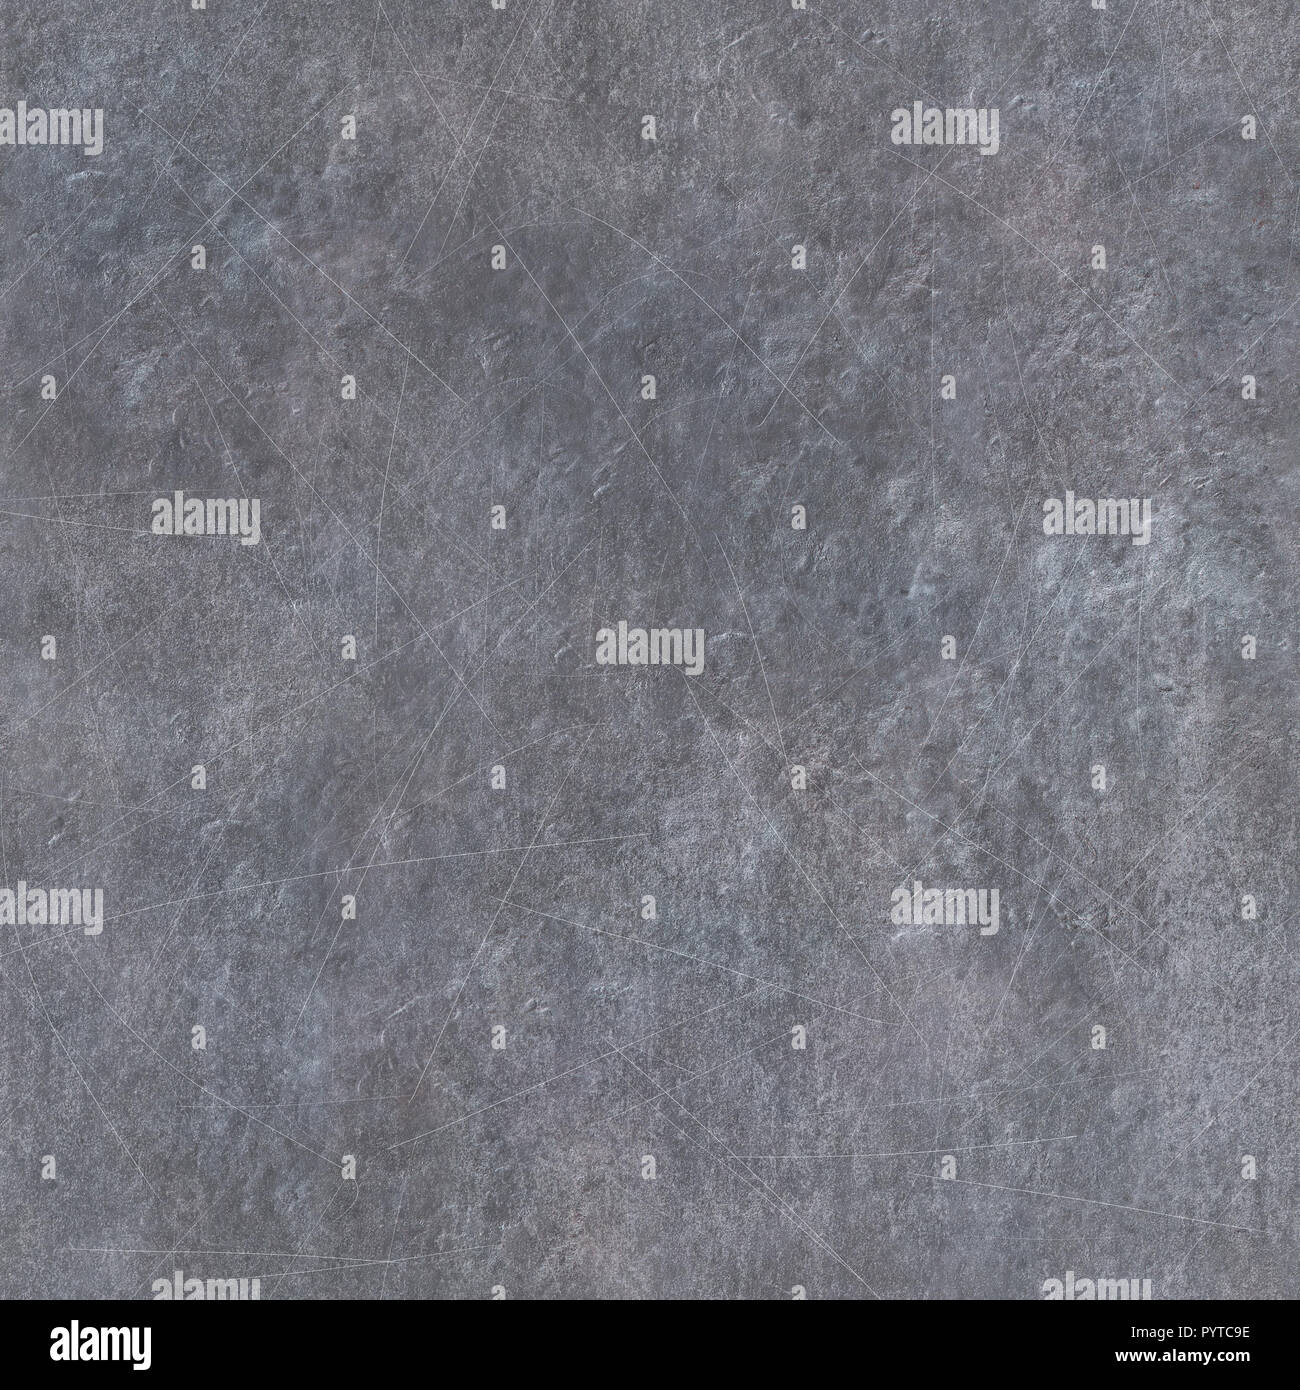 Scratched old rustic metal seamless texture Stock Photo